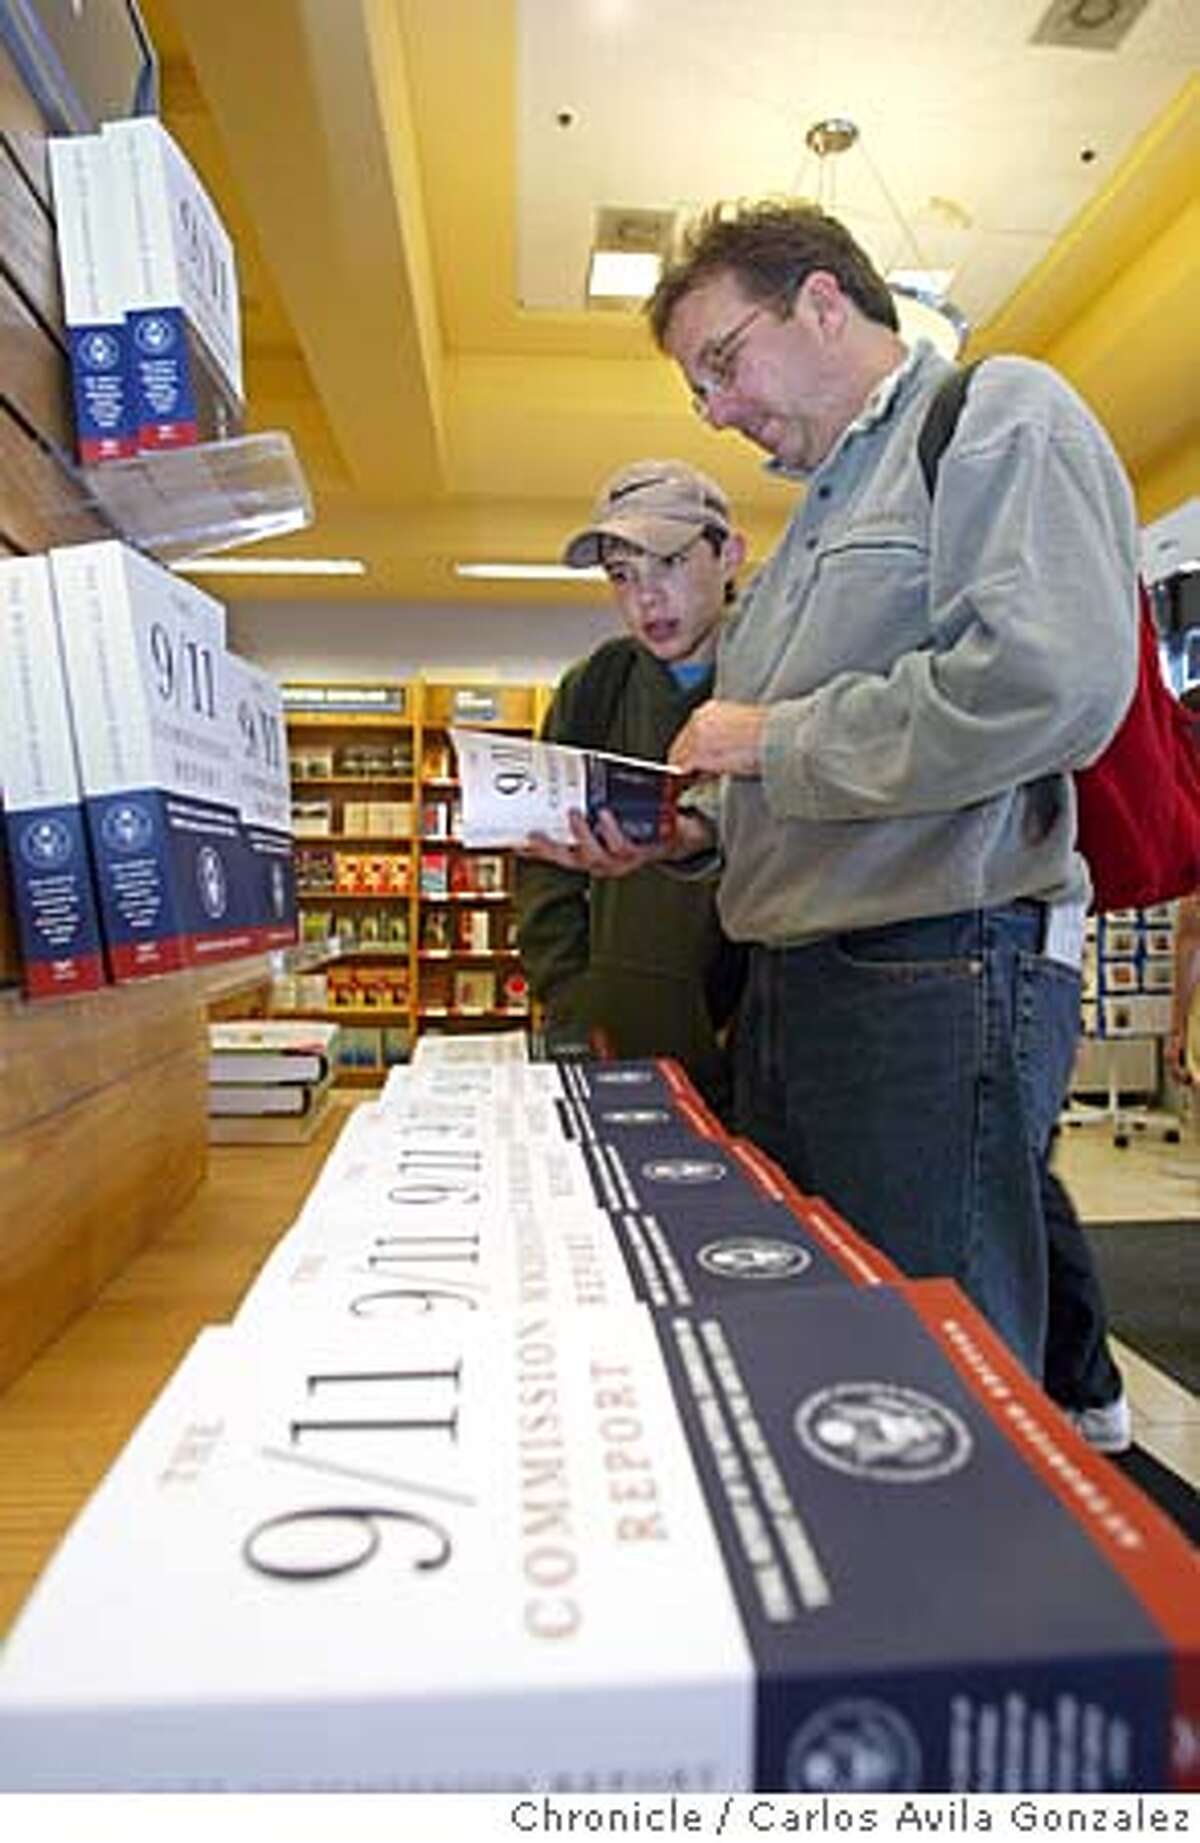 911REPORT_002_CAG.JPG Bill Personke, and his son, Dolan, 15, leaf through a copy of the 9/11 Commission Report at Borders Book Store in San Francisco, Ca., on Thursday, July 22, 2004. This book, details the commission's findings in the investigations following the 9/11 hijackings and the ensuing terrorism. Photo taken on 07/22/04, in San Francisco, Ca. Photo by Carlos Avila Gonzalez/The San Francisco Chronicle Ran on: 09-19-2004 Bill Personke and his son, Dolan, 15, skim the report at San Franciscos Borders in July. Datebook#Datebook#Chronicle#11/12/2004#ALL#Advance##0422211109